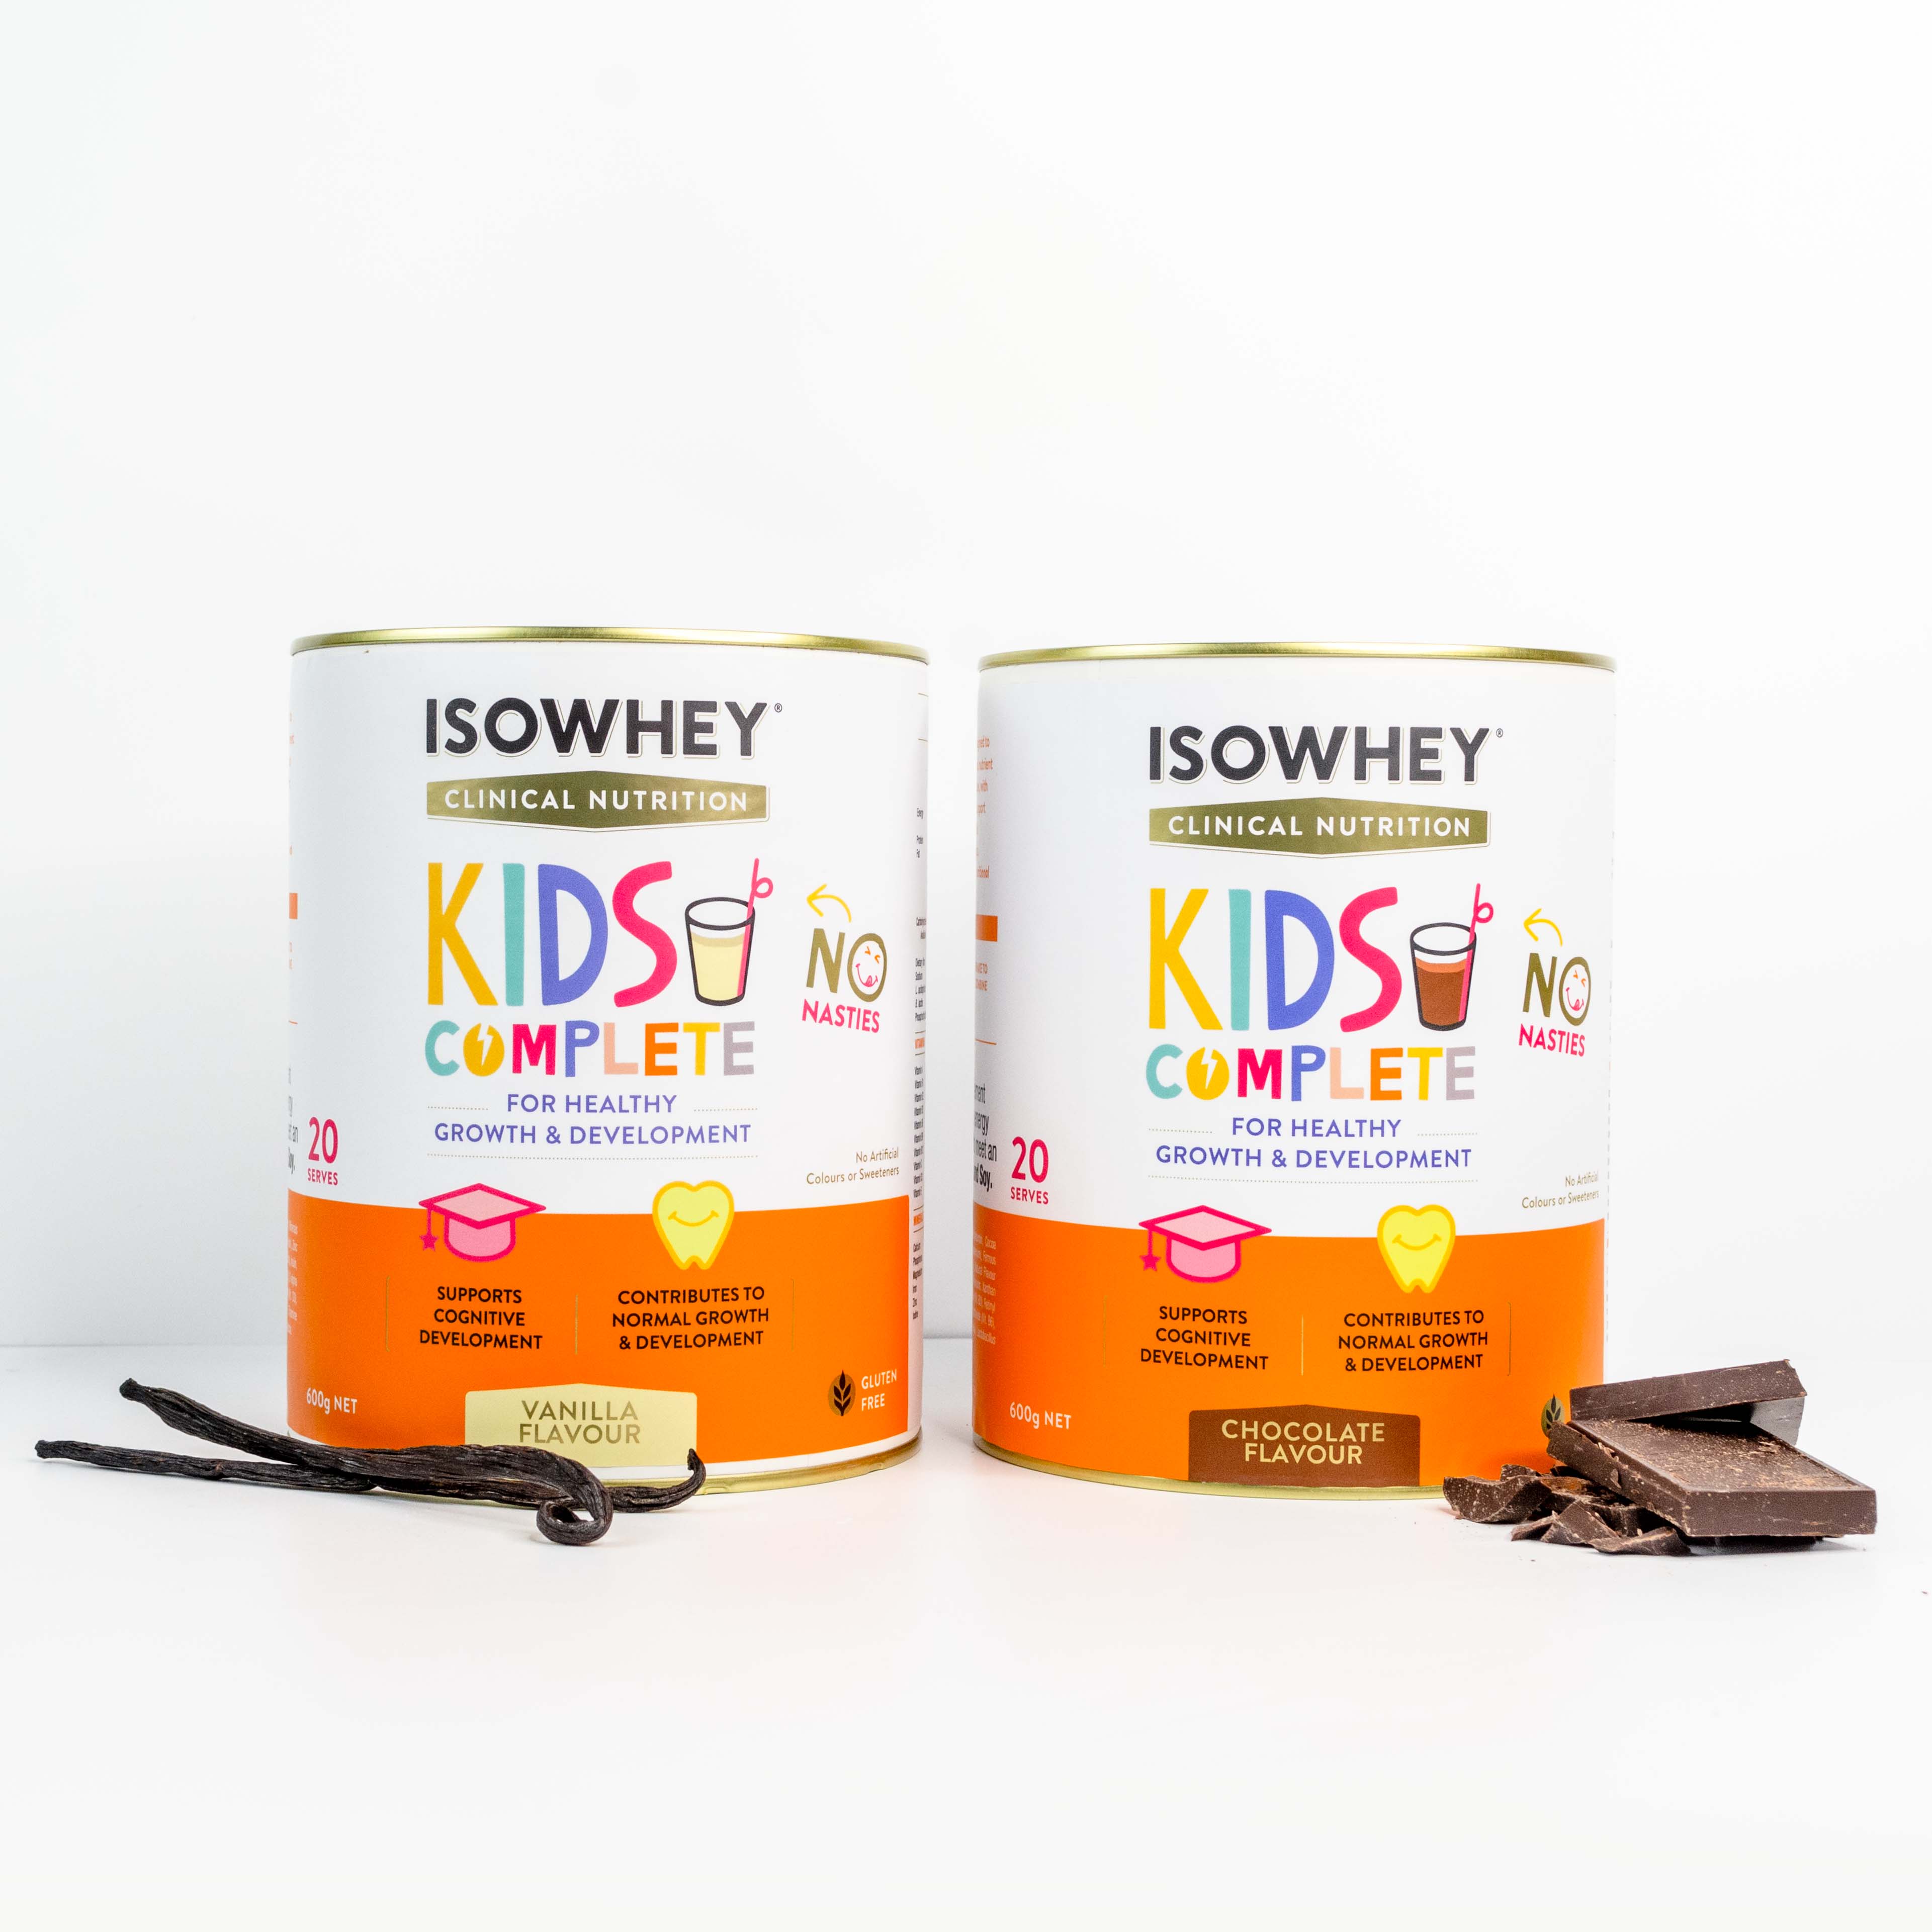 2 cans of IsoWhey Clinical Nutrition Kids Complete 600g - Chocolate and Vanilla Flavor